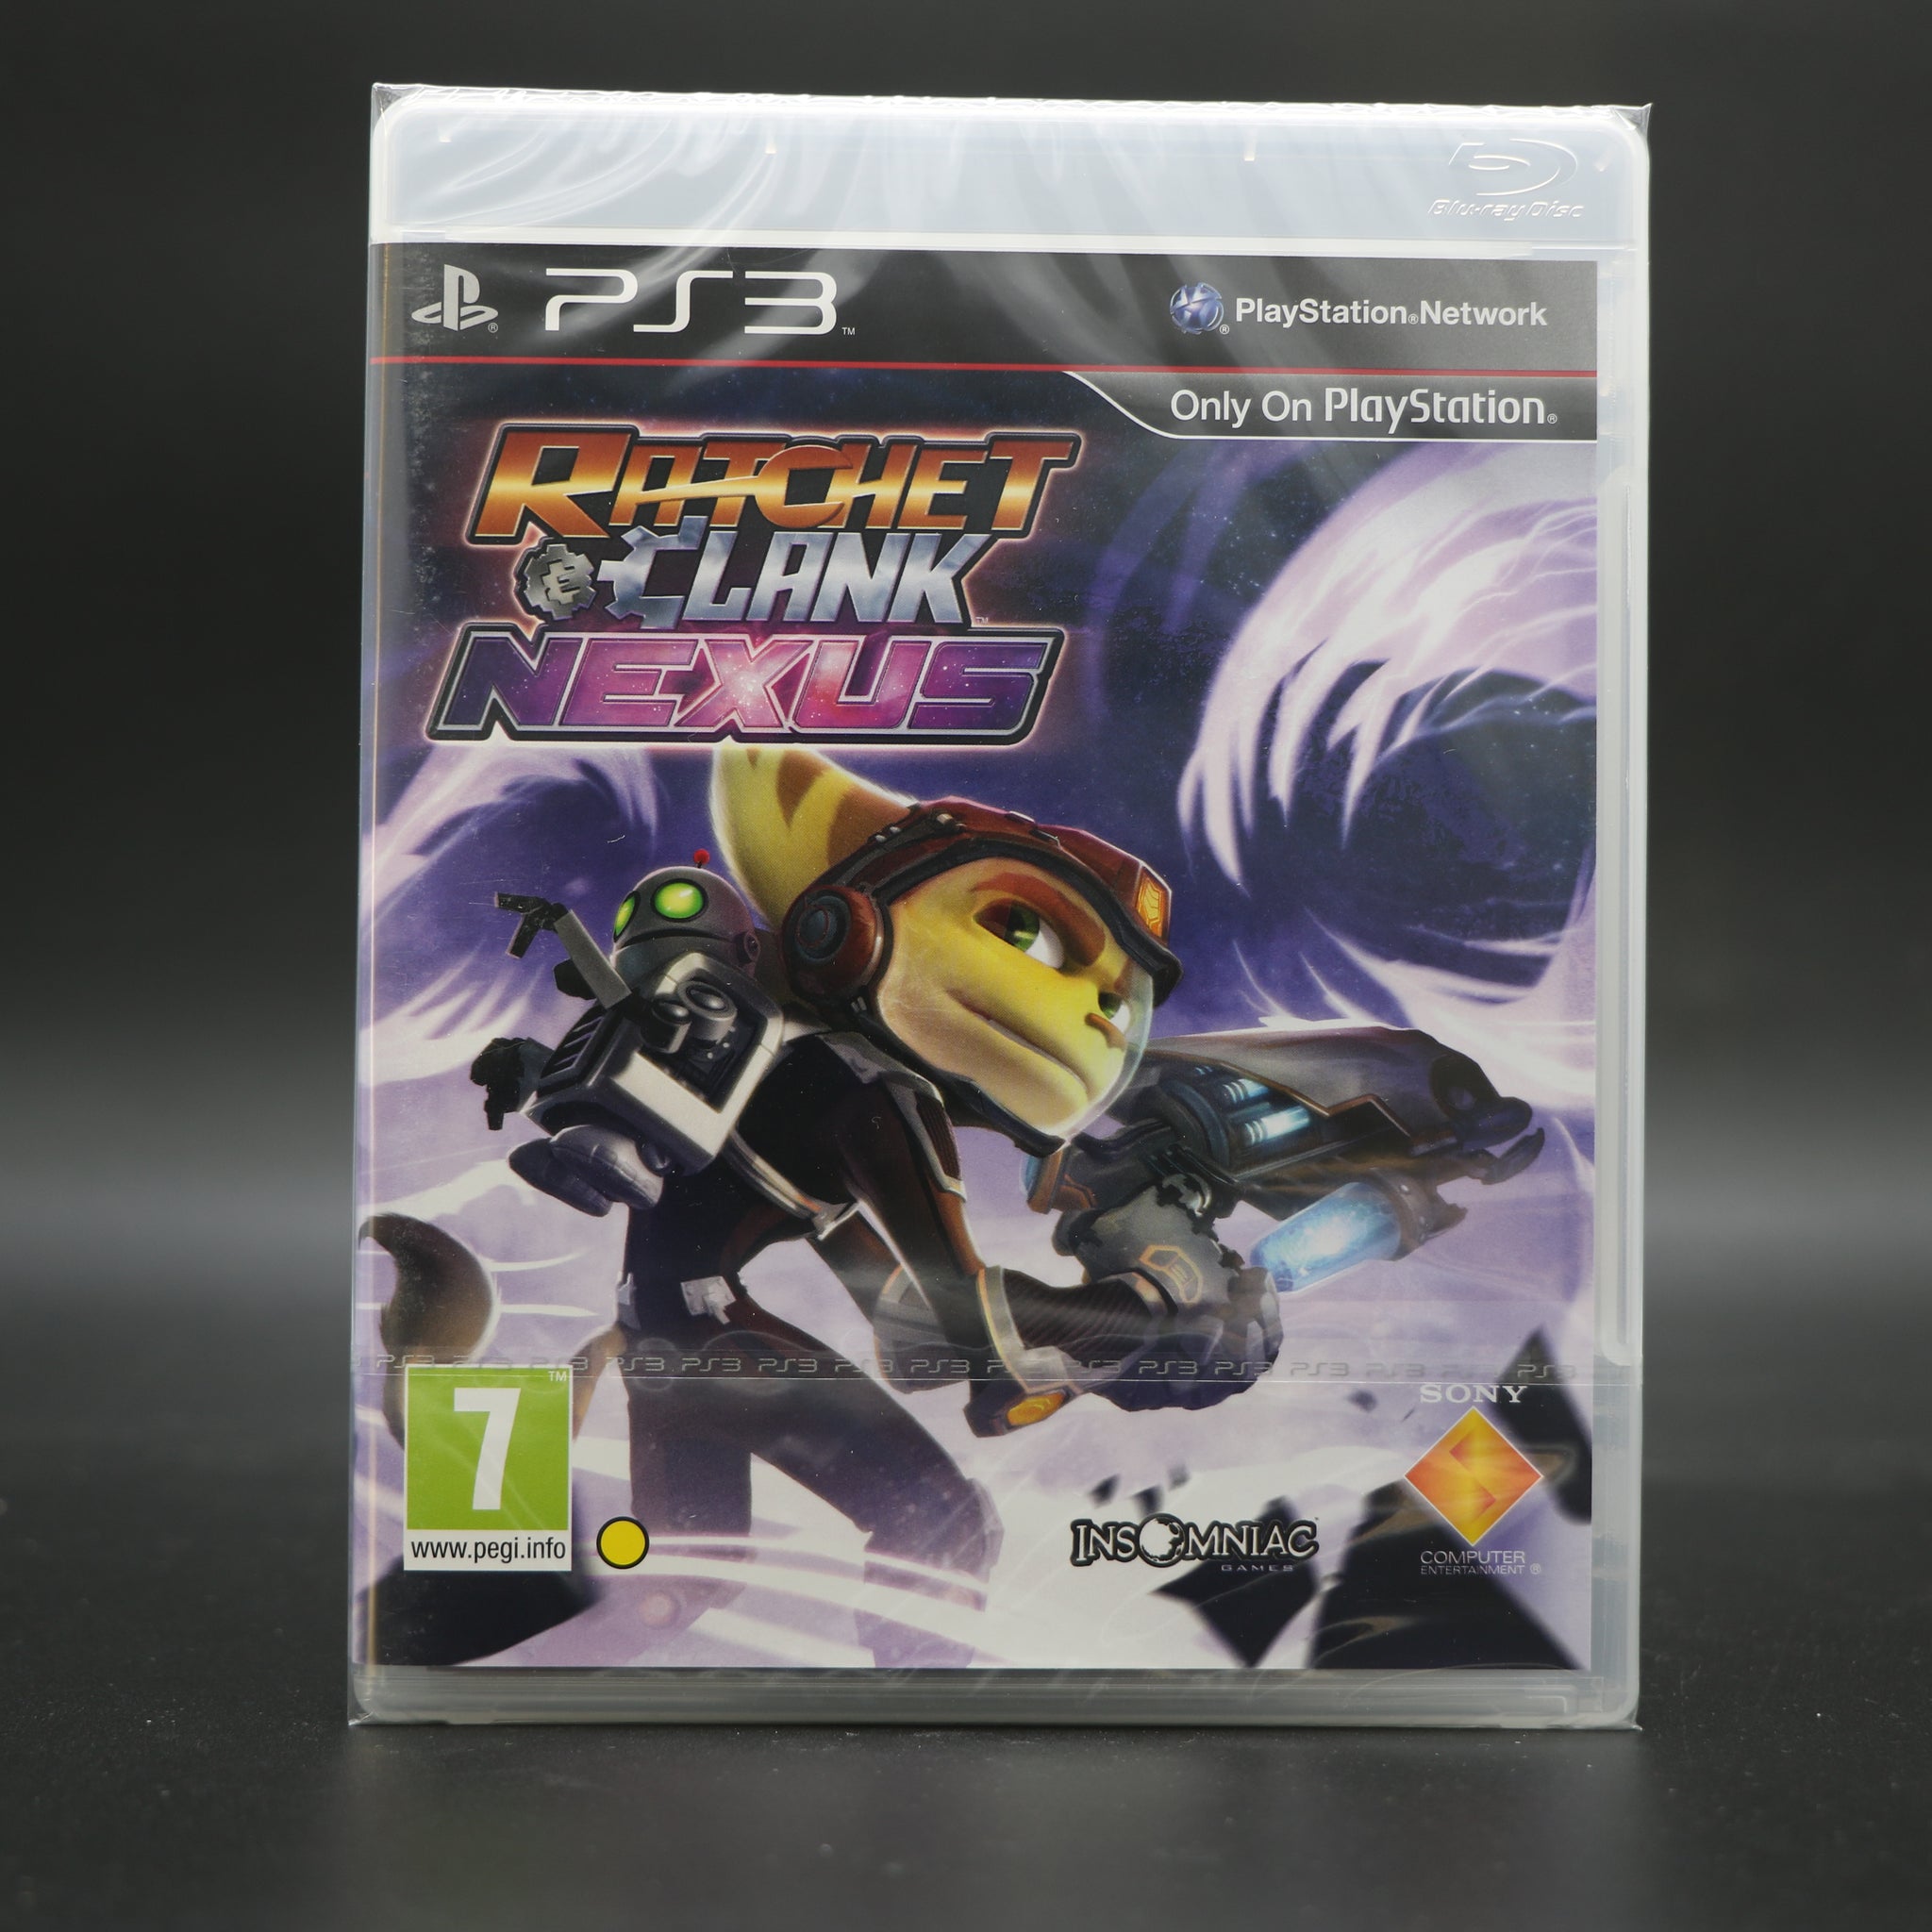 Ratchet & Clank | Nexus | Playstation 3 PS3 Game | New & Sealed